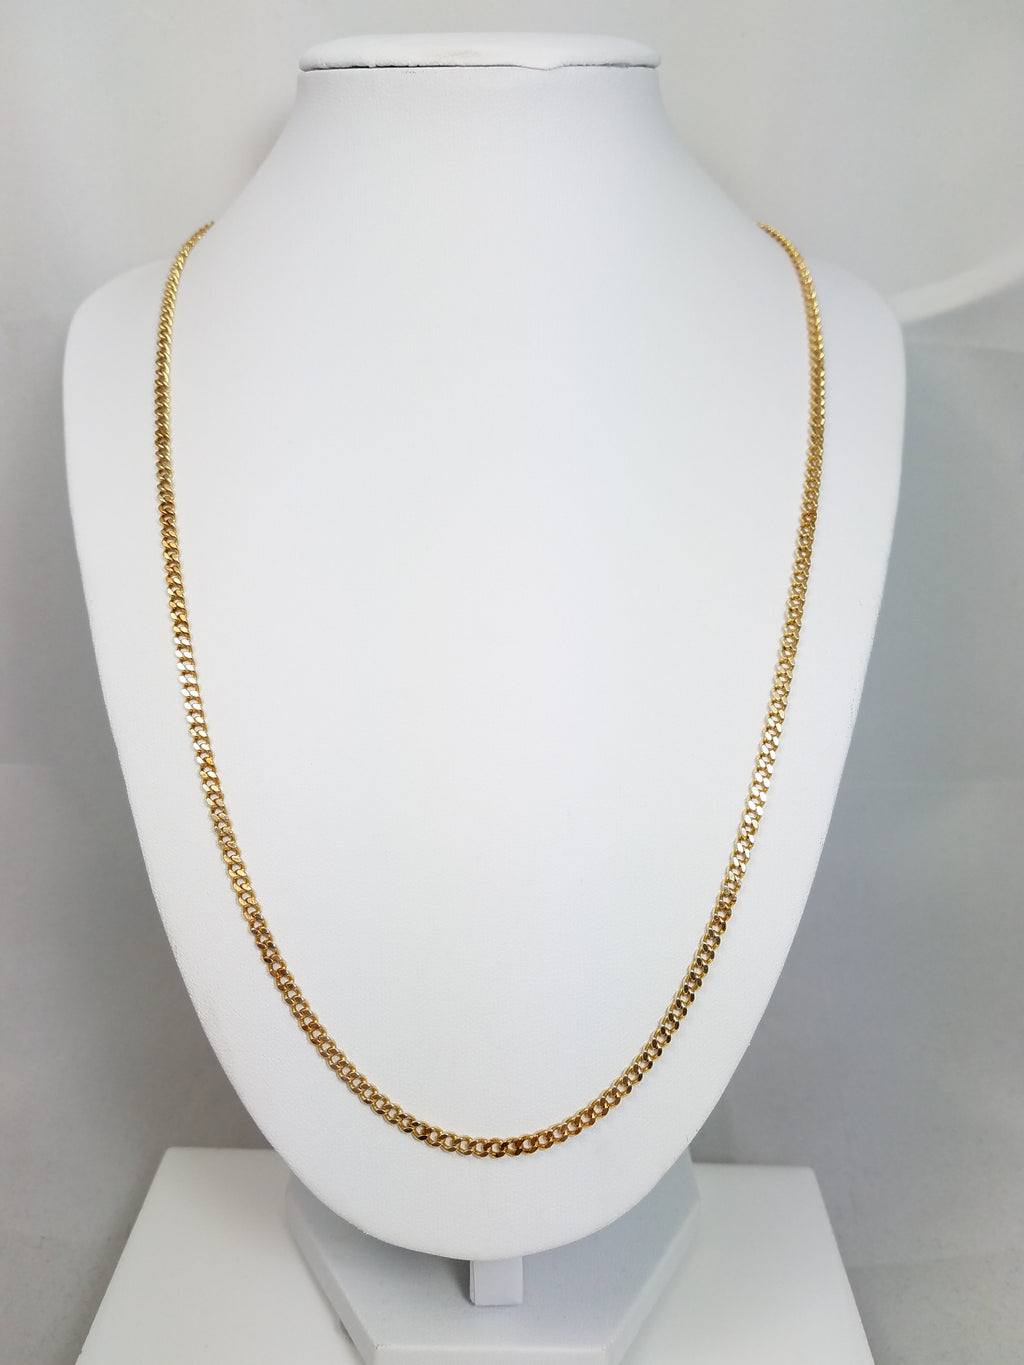 22" 14k Solid Yellow gold Curb Link Chain Necklace